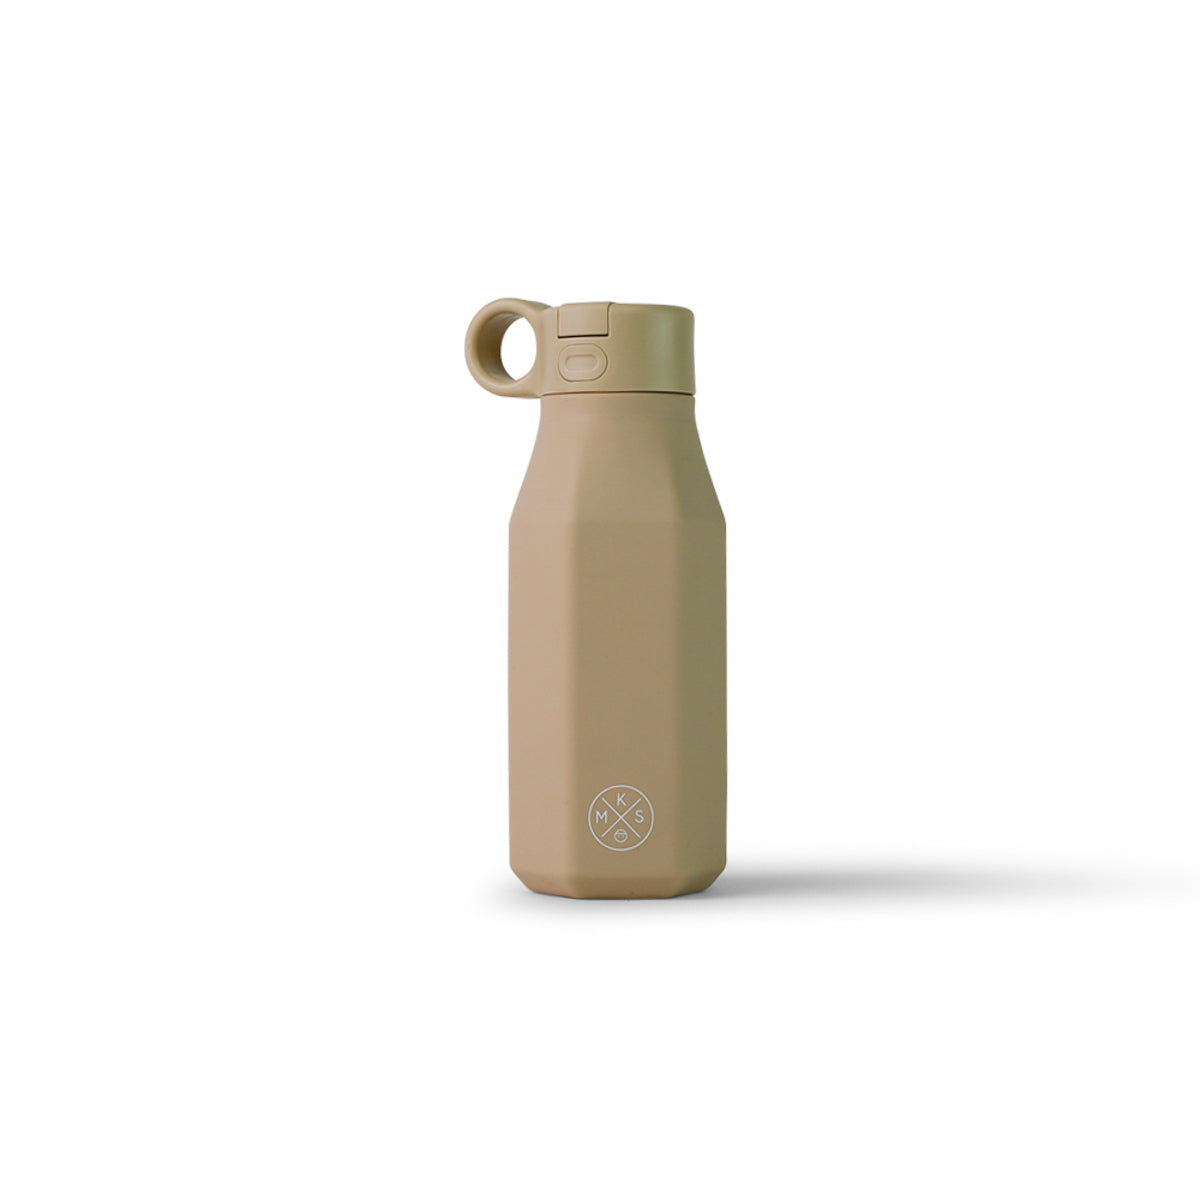 Durable, easy to clean, durable, a perfect on-the-go water bottle with straw lid and handle on the top. Must have at school, while traveling or simply at home. For kids and adults. MKS Miminoo Arizona USA Brand. 13 colors. Wholesale Faire. Beige. For Boys and girls. 